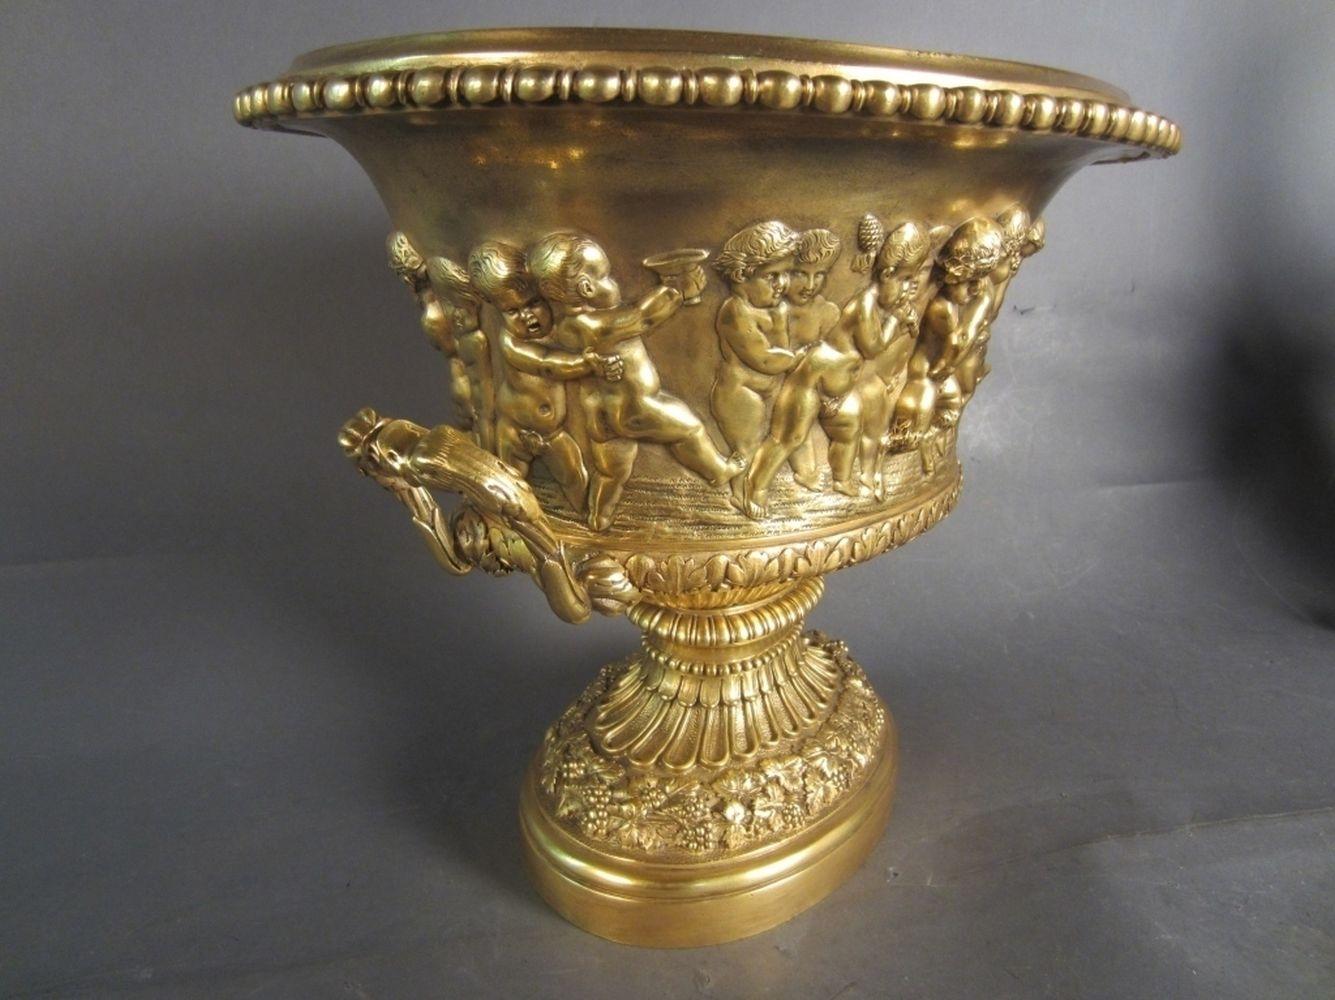 Bronze doré centerpiece/planter antique, finest quality 19th century. Antique gilt bronze figural centerpiece/ planter with sculpted swan head handles. Figural design in high relief around body of planter. Manor of Clodion, French, 19th century.